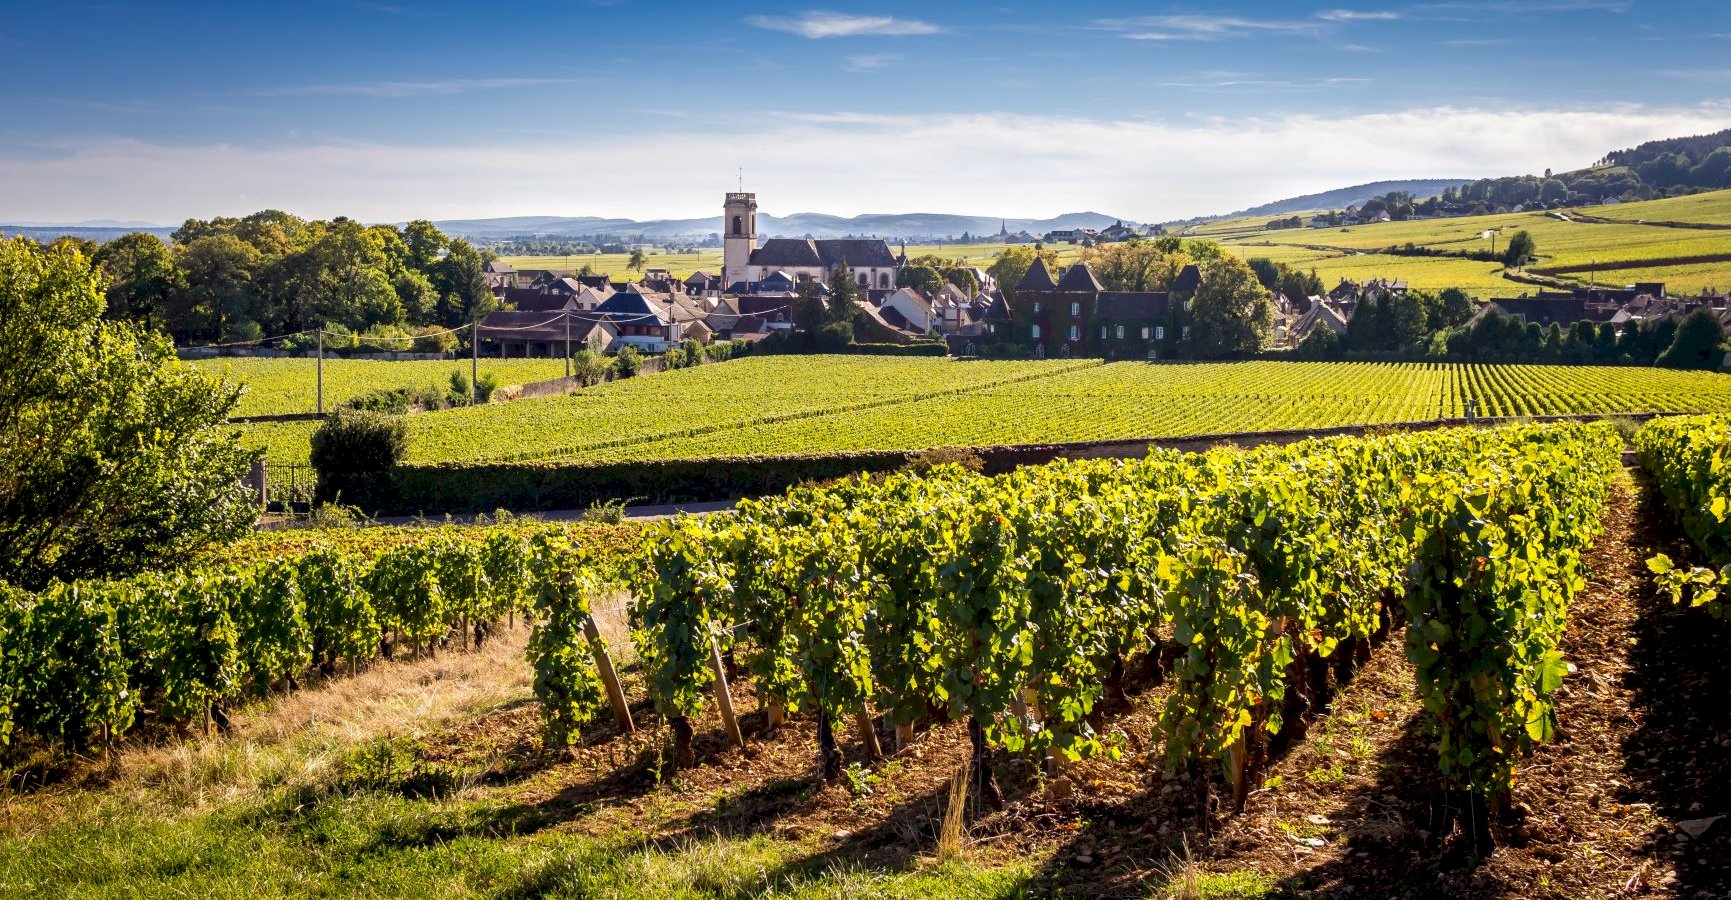 Ophorus Tours - 4 Days Private Burgundy Wine Tours Travel Package - Beaune France